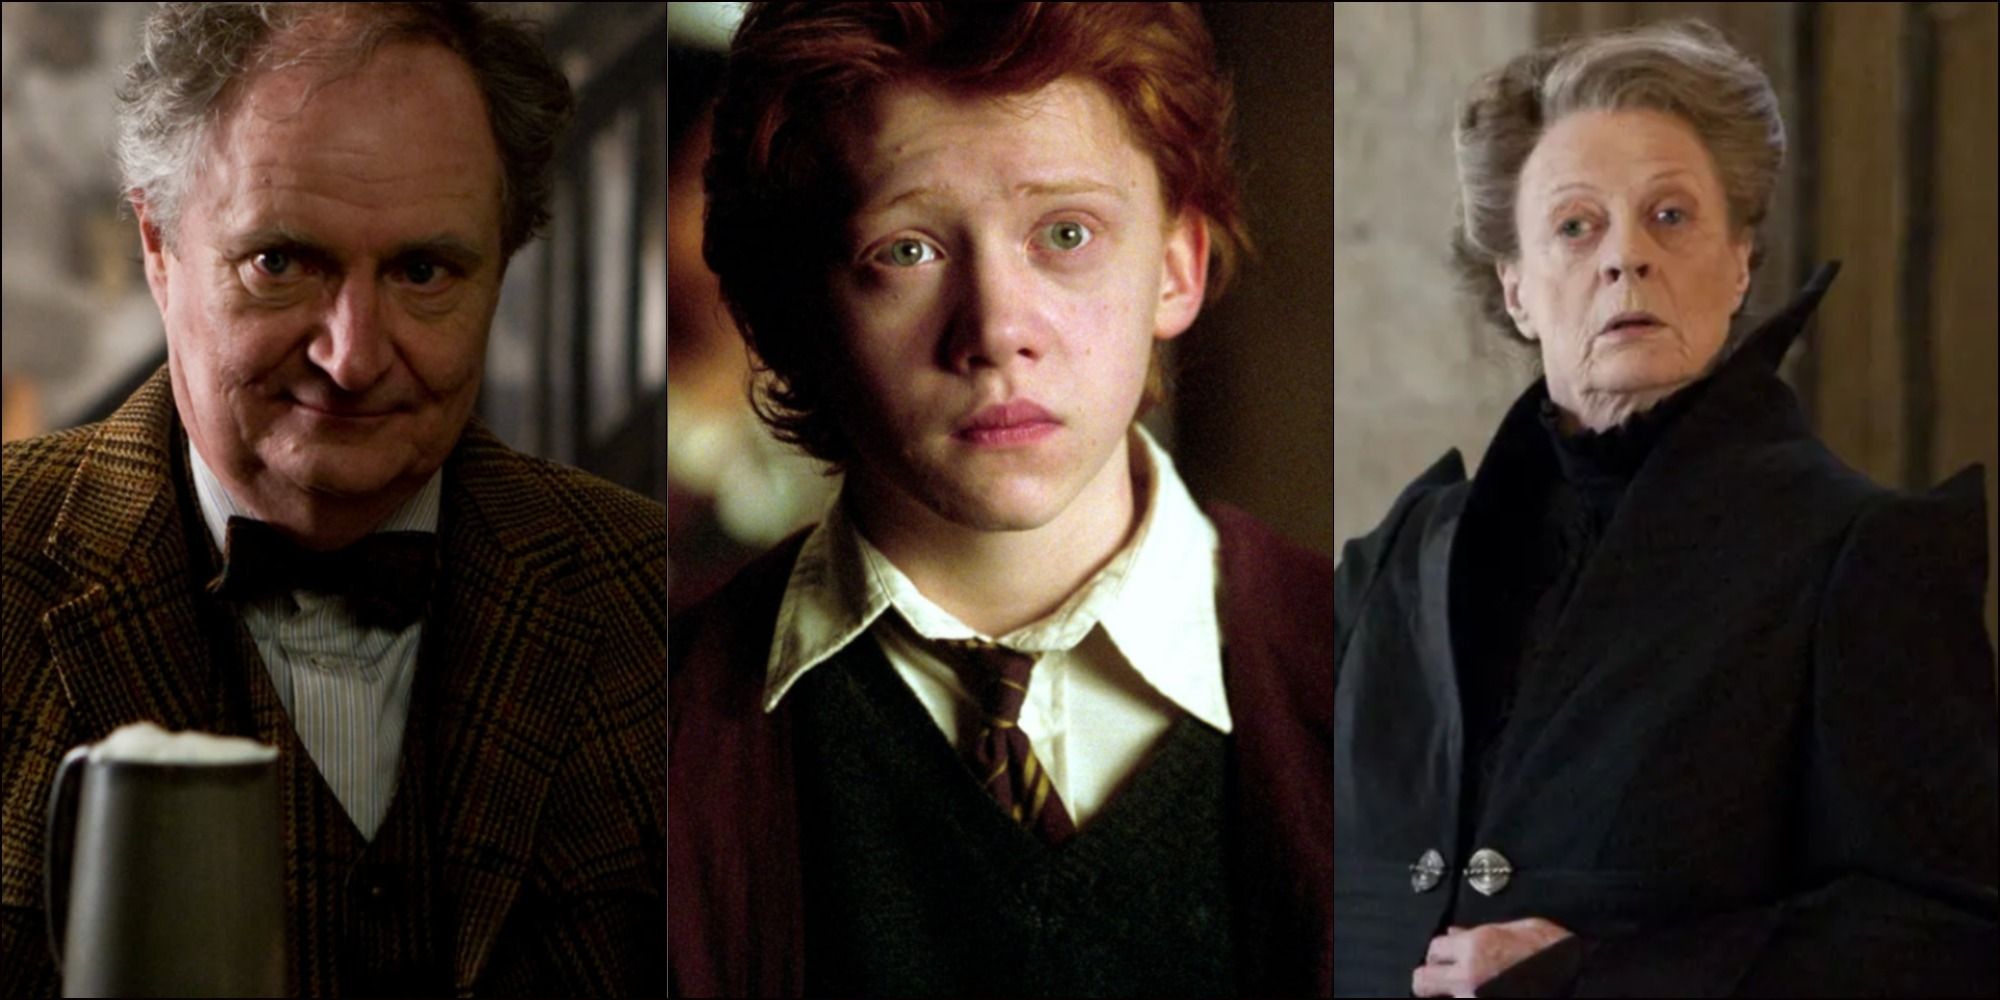 Which character in Harry Potter has the best comedic timing?